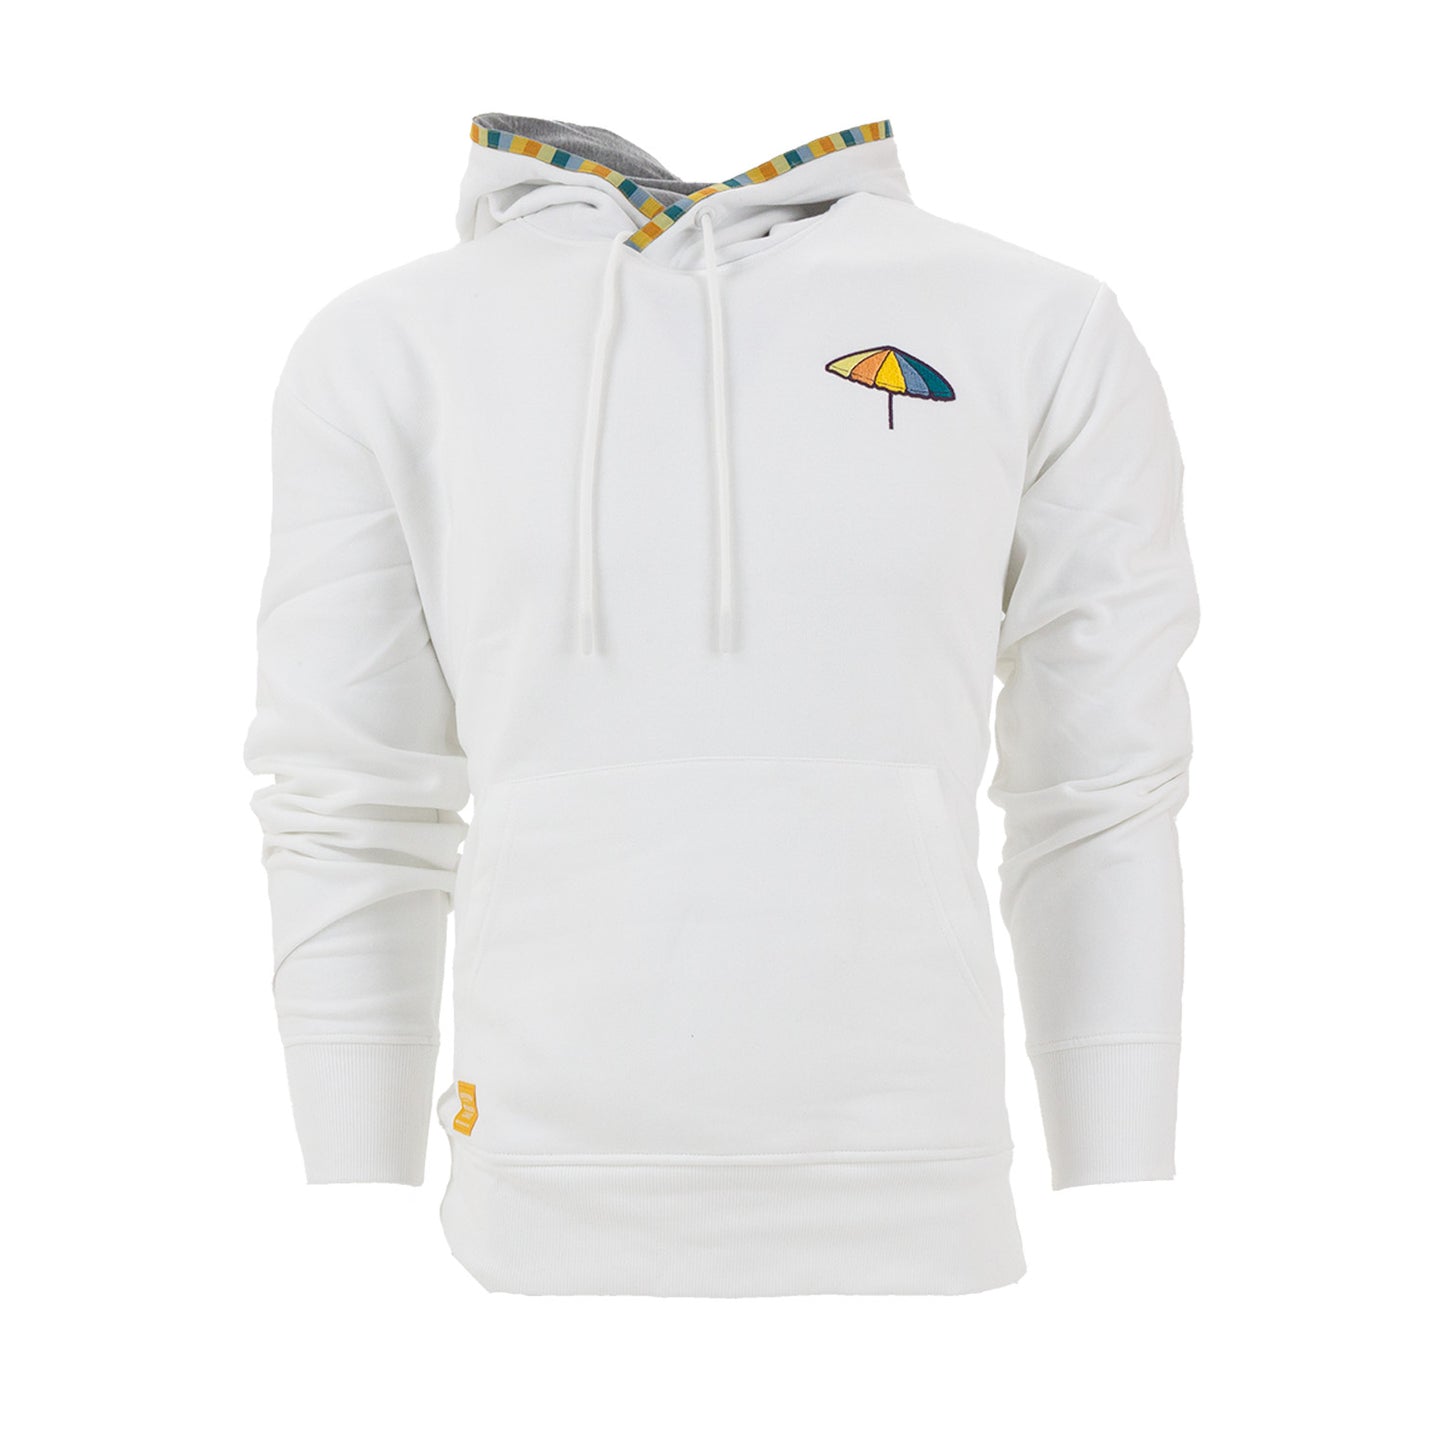 Mango Cart Signature Collection - Mens Iconic Hoodie (White)